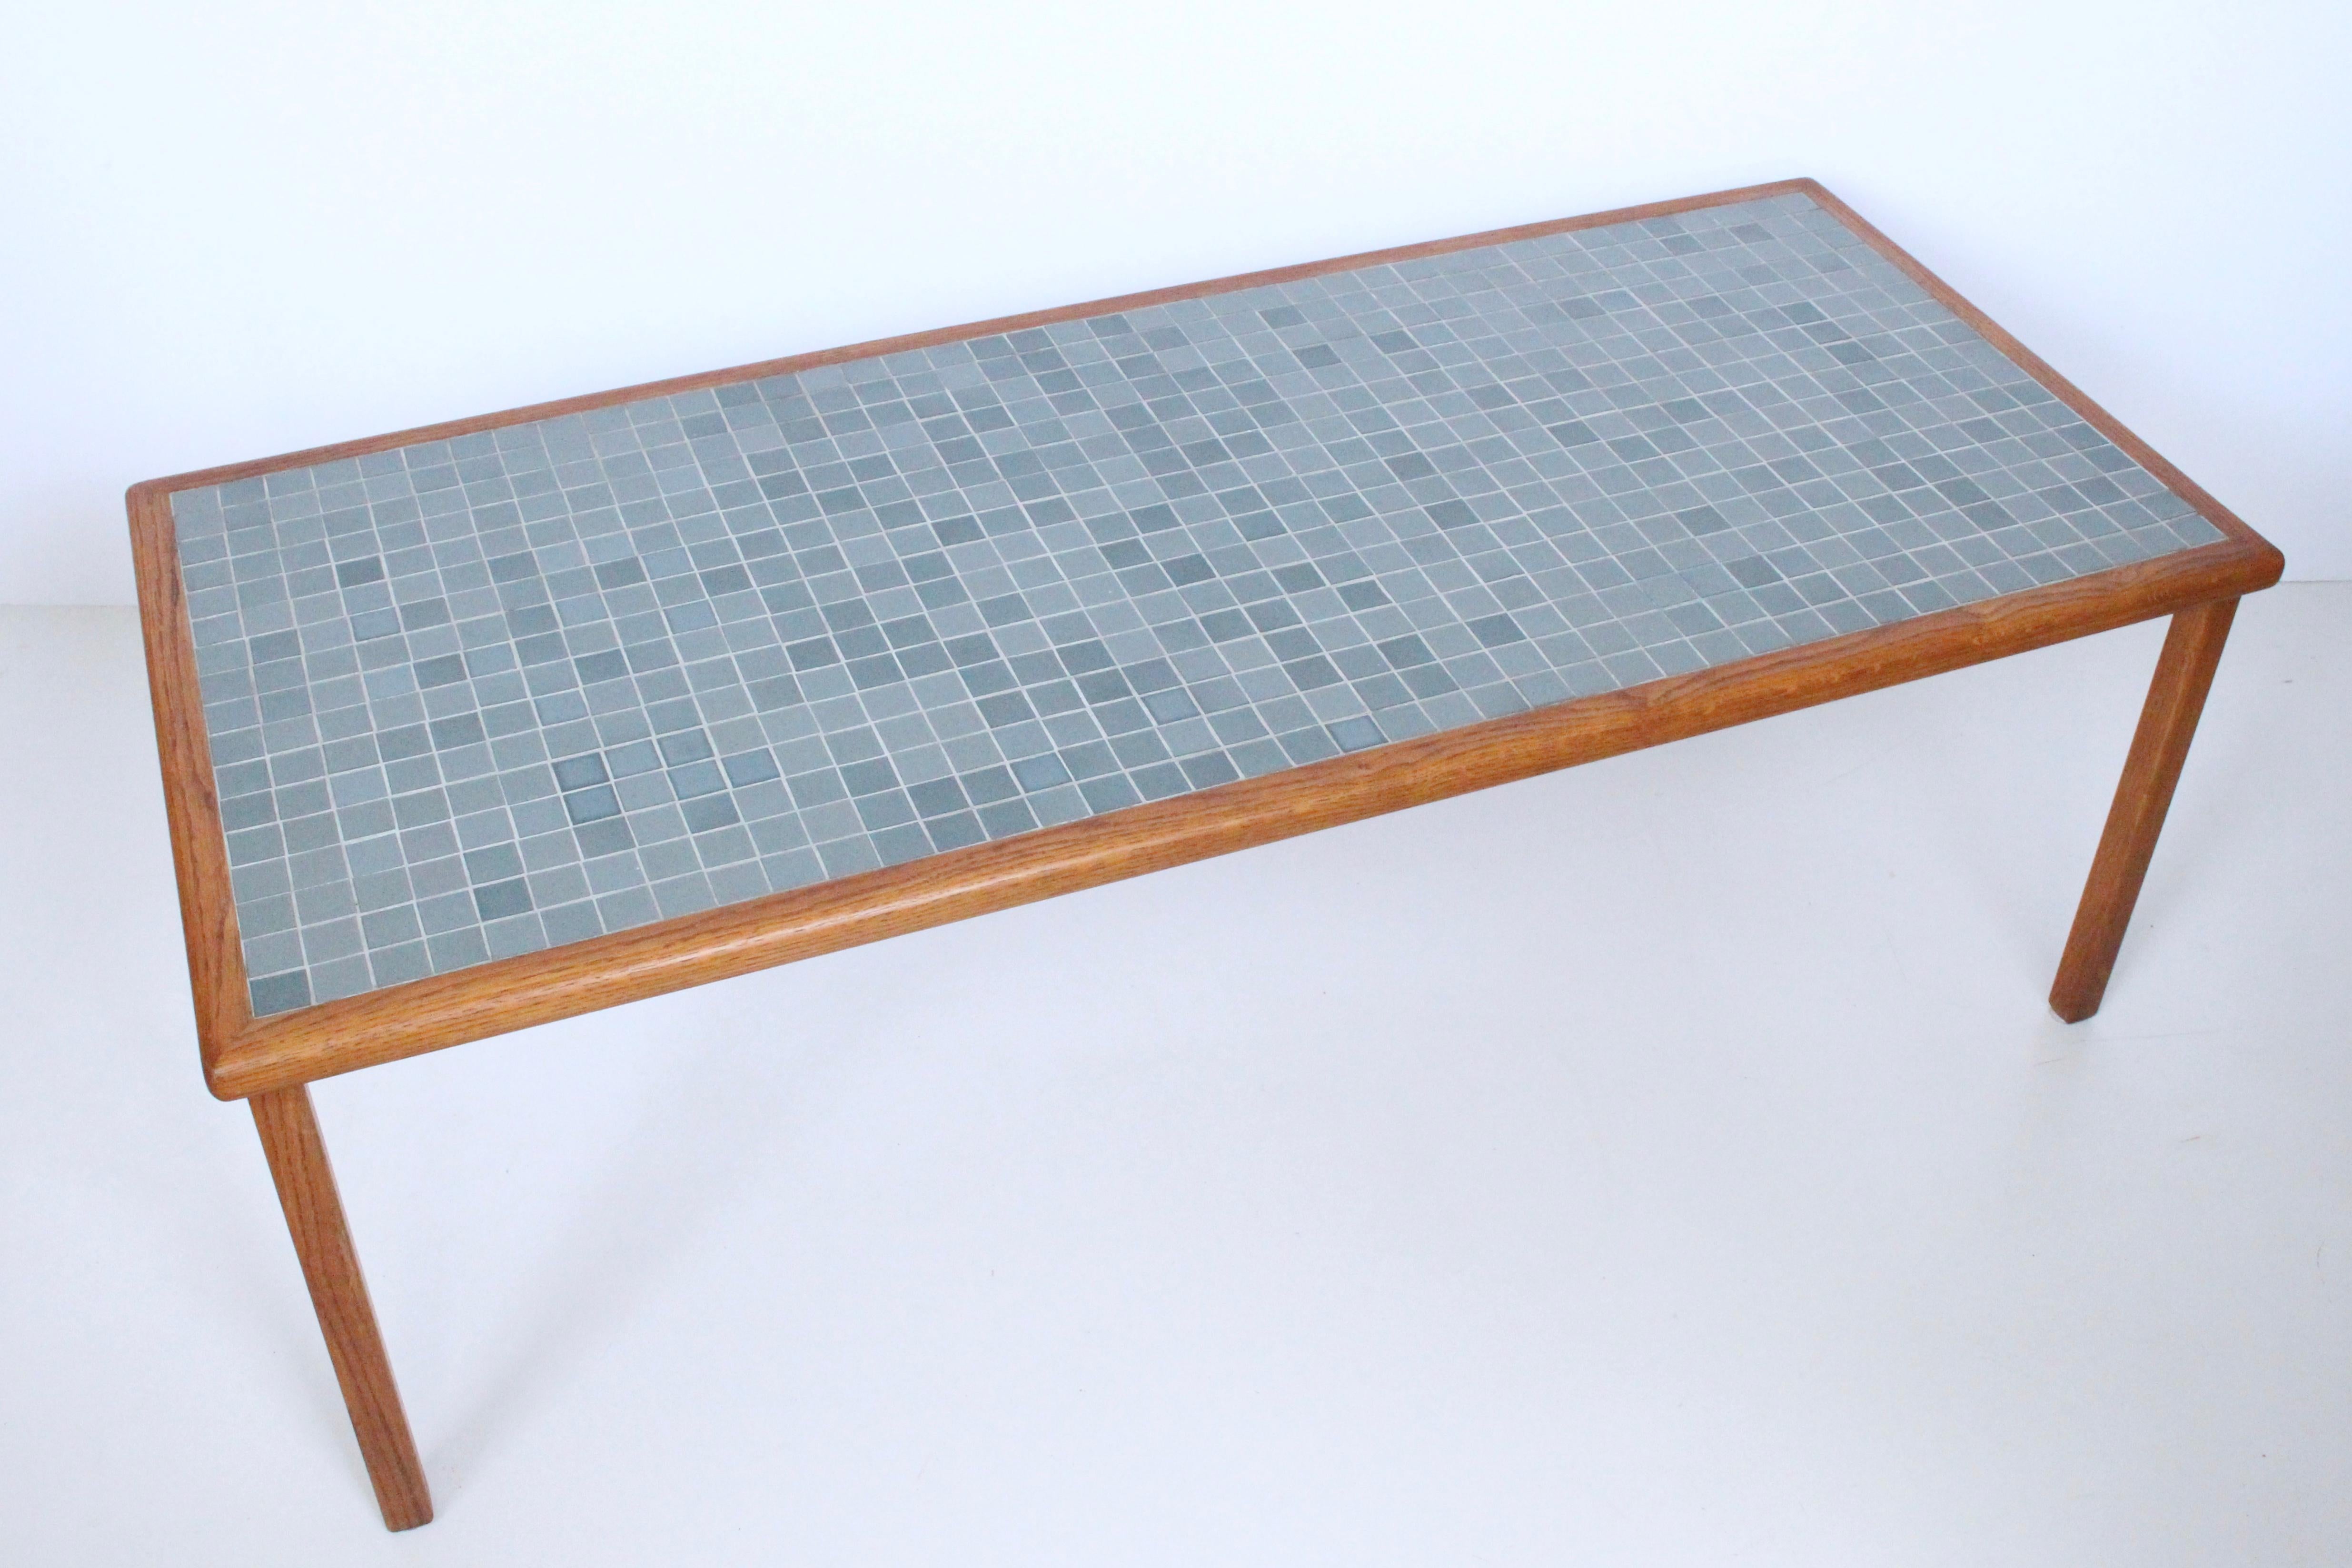 American Mid-Century Modern Jane and Gordon Martz teal tile top table, 1950s. Featuring a larger rectangular braced Oak framework atop square Oak legs, inset with a variegated Teal toned matte glazed stoneware tile pattern. Desirable teal color and